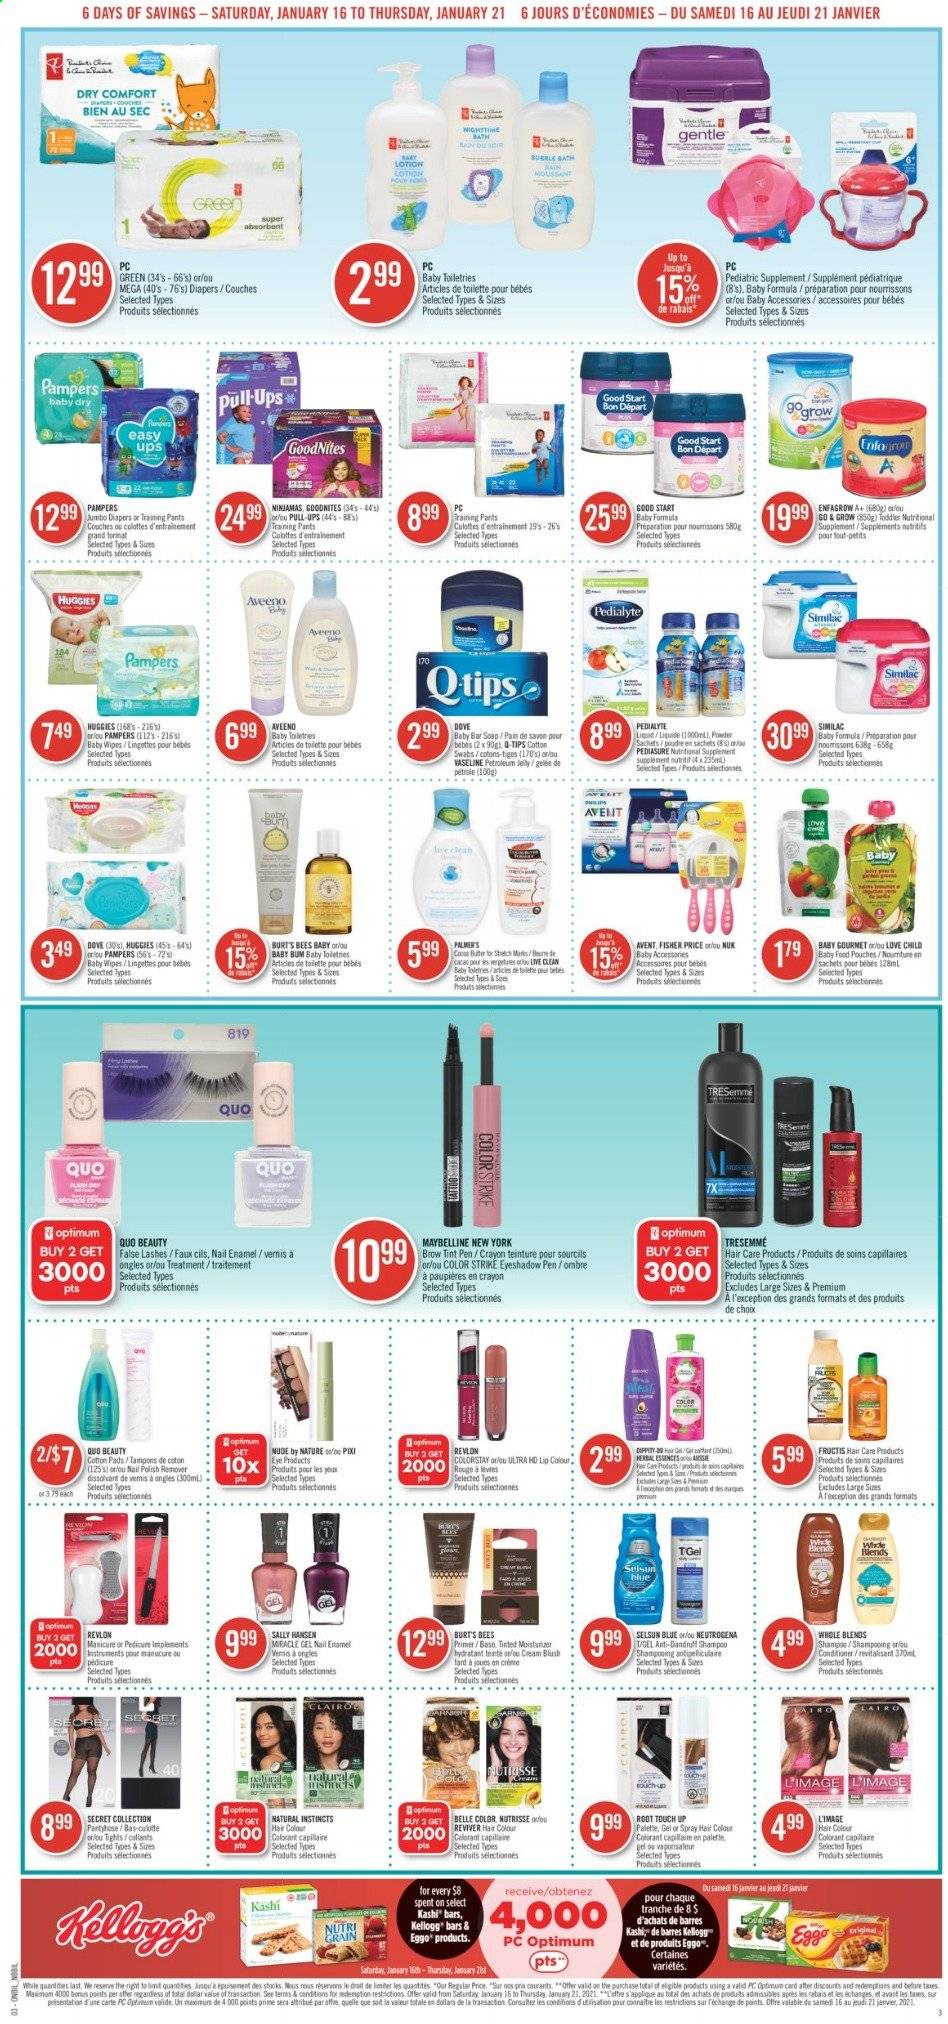 thumbnail - Shoppers Drug Mart Flyer - January 16, 2021 - January 21, 2021 - Sales products - Nutri-Grain, Similac, wipes, pants, baby wipes, nappies, Nuk, baby pants, Aveeno, petroleum jelly, Vaseline, soap bar, soap, conditioner, Revlon, TRESemmé, hair color, Fructis, body lotion, nail enamel, nail polish remover, eyeshadow, tights, pantyhose, Maybelline, Neutrogena, Sally Hansen, shampoo, Huggies, Palette, Pampers. Page 3.